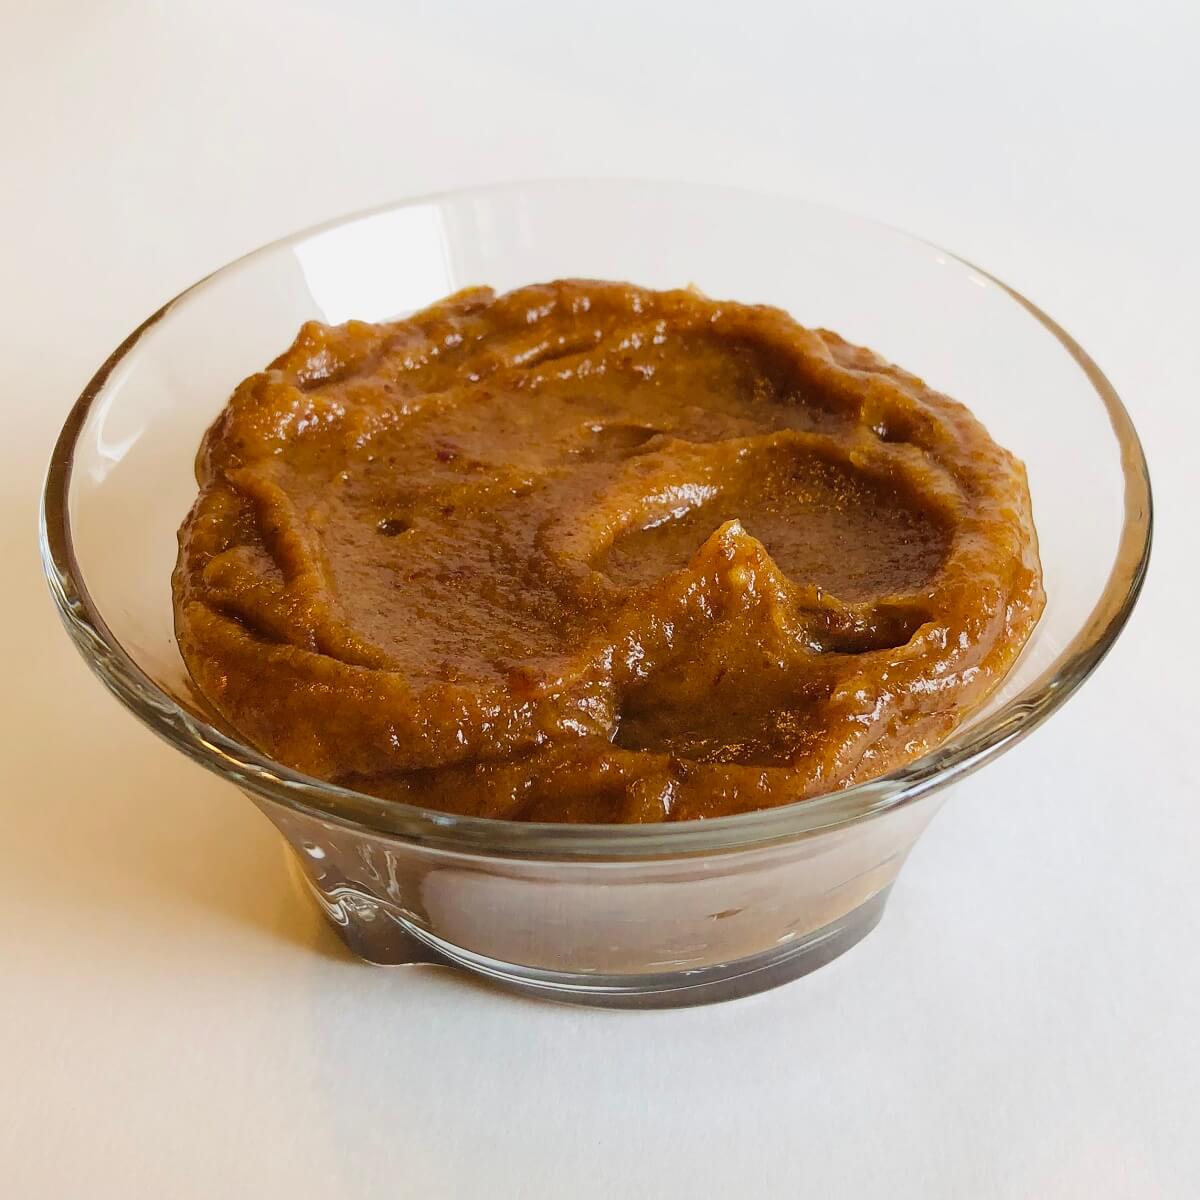 A paste made from dates in a glass dish.